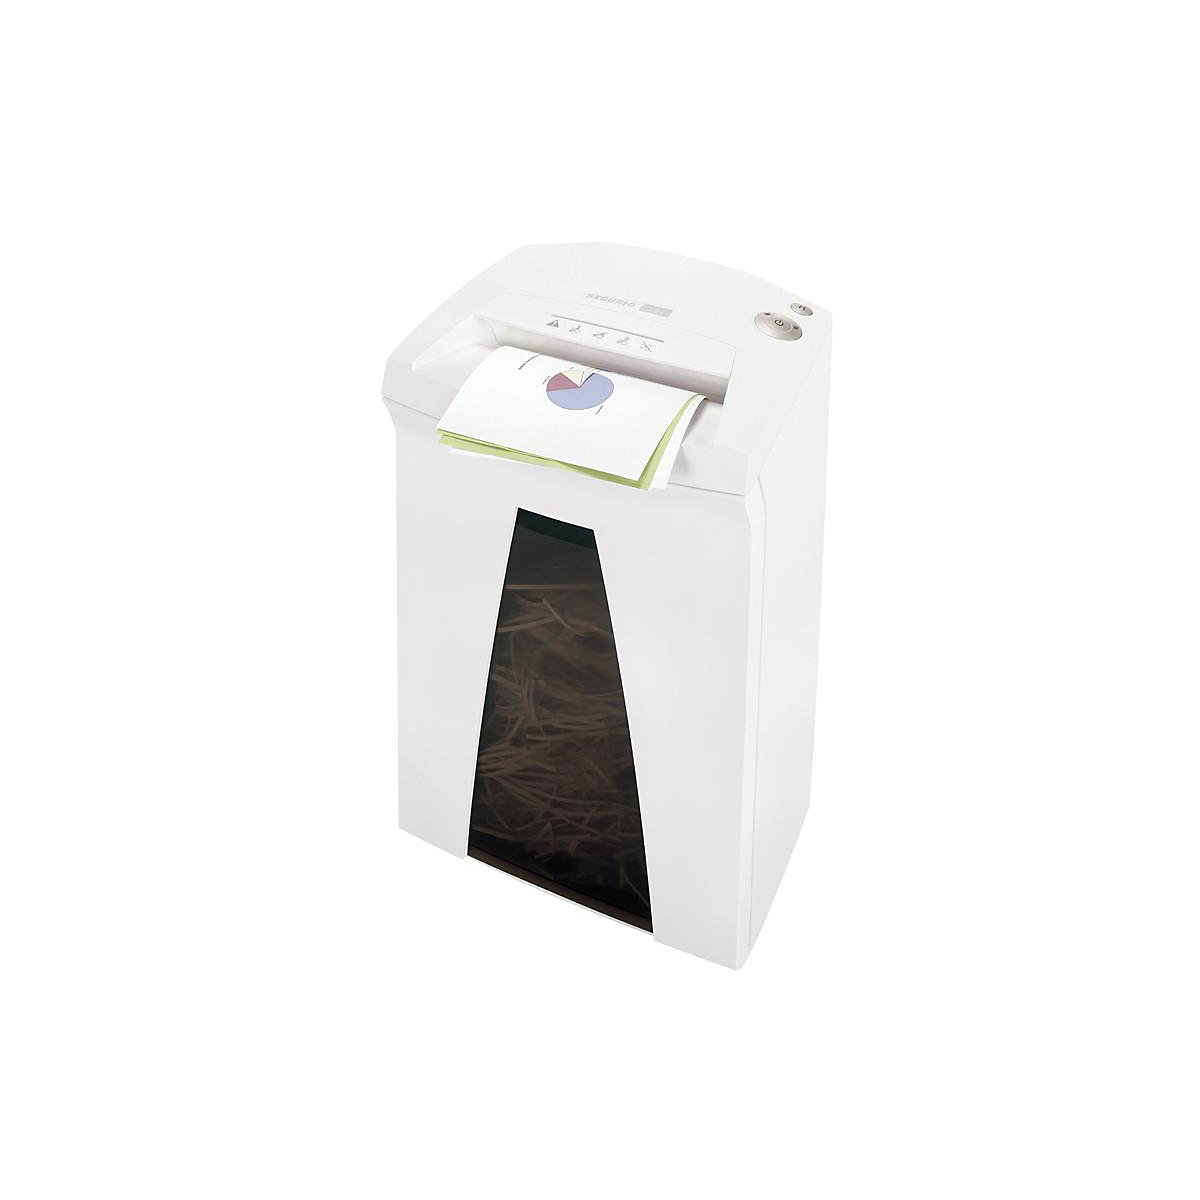 HSM – SECURIO document shredder B24, collection capacity 34 l, particles, 14 – 16 sheets